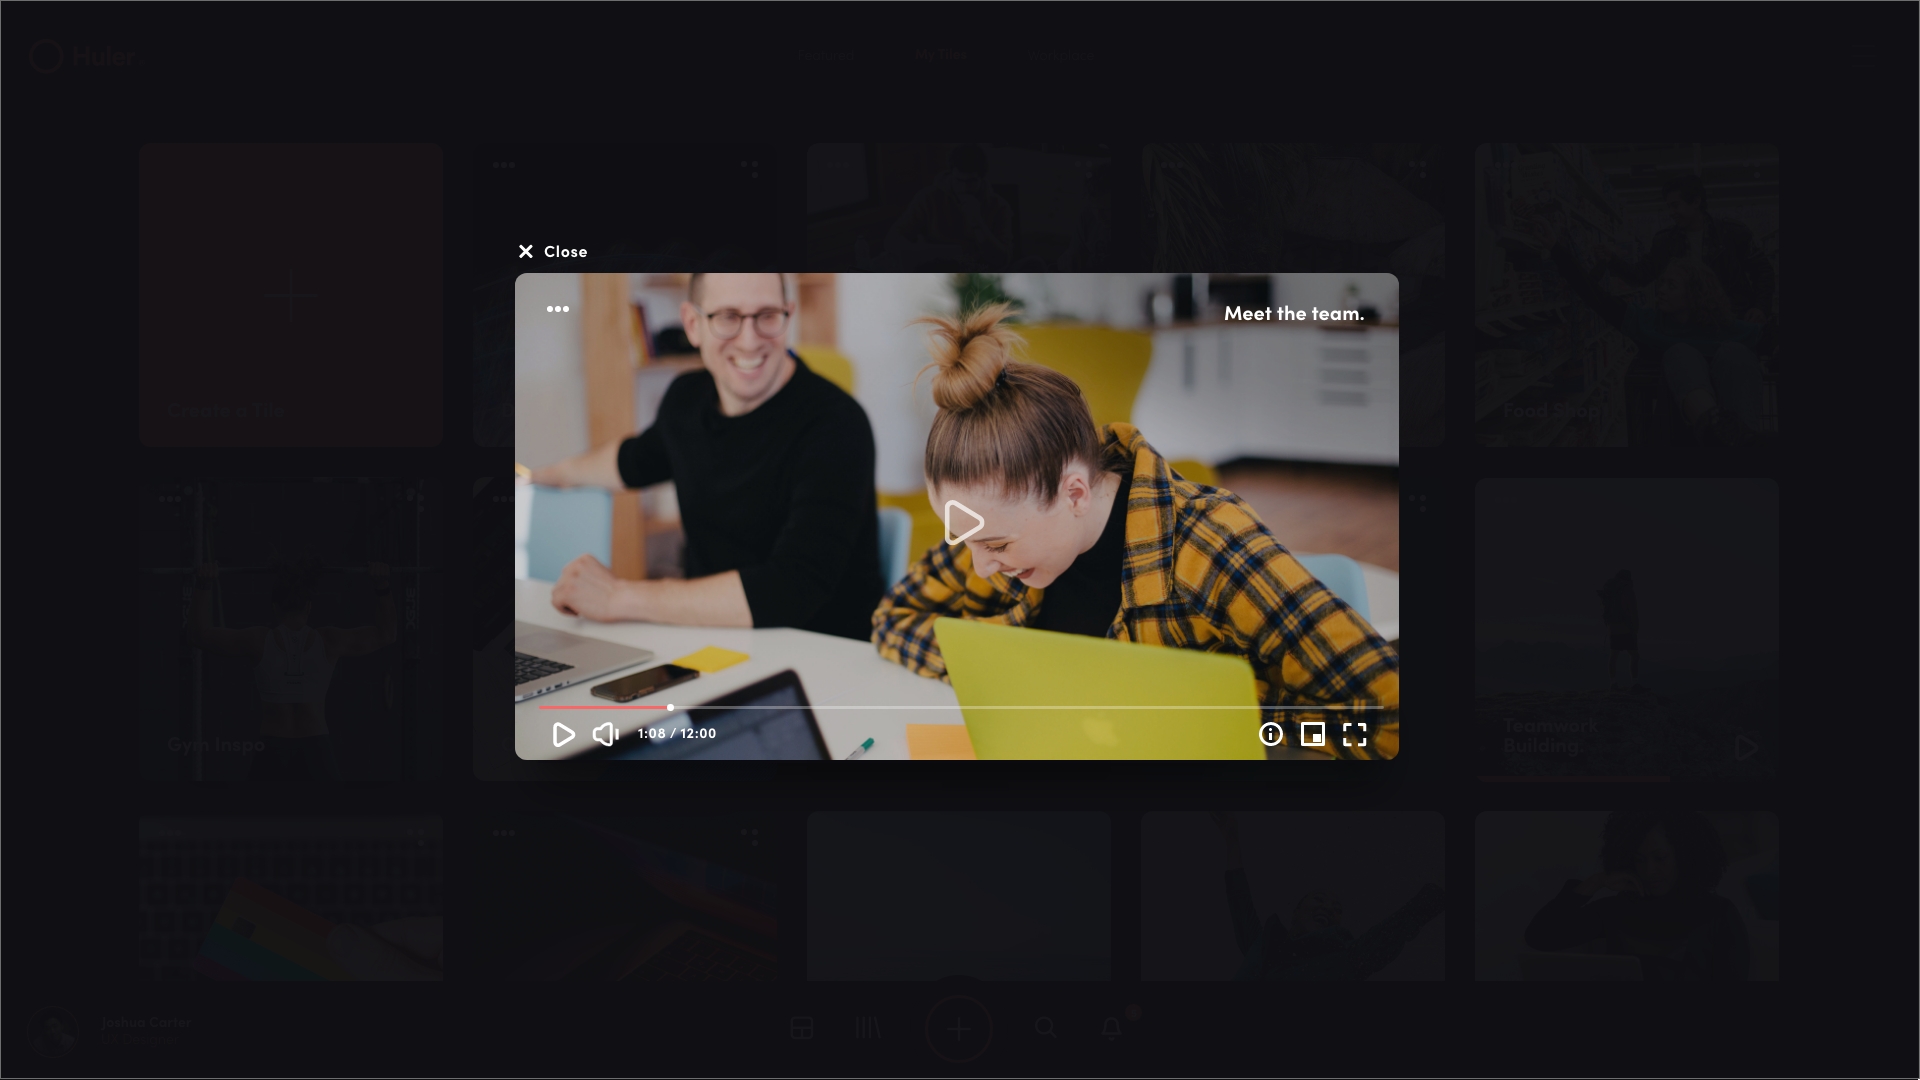 With HulerHub's media tiles, users and admins can embed a variety of multimedia content, such as videos, podcasts, and SCORM, which can all be accessed directly through the platform in just one click.